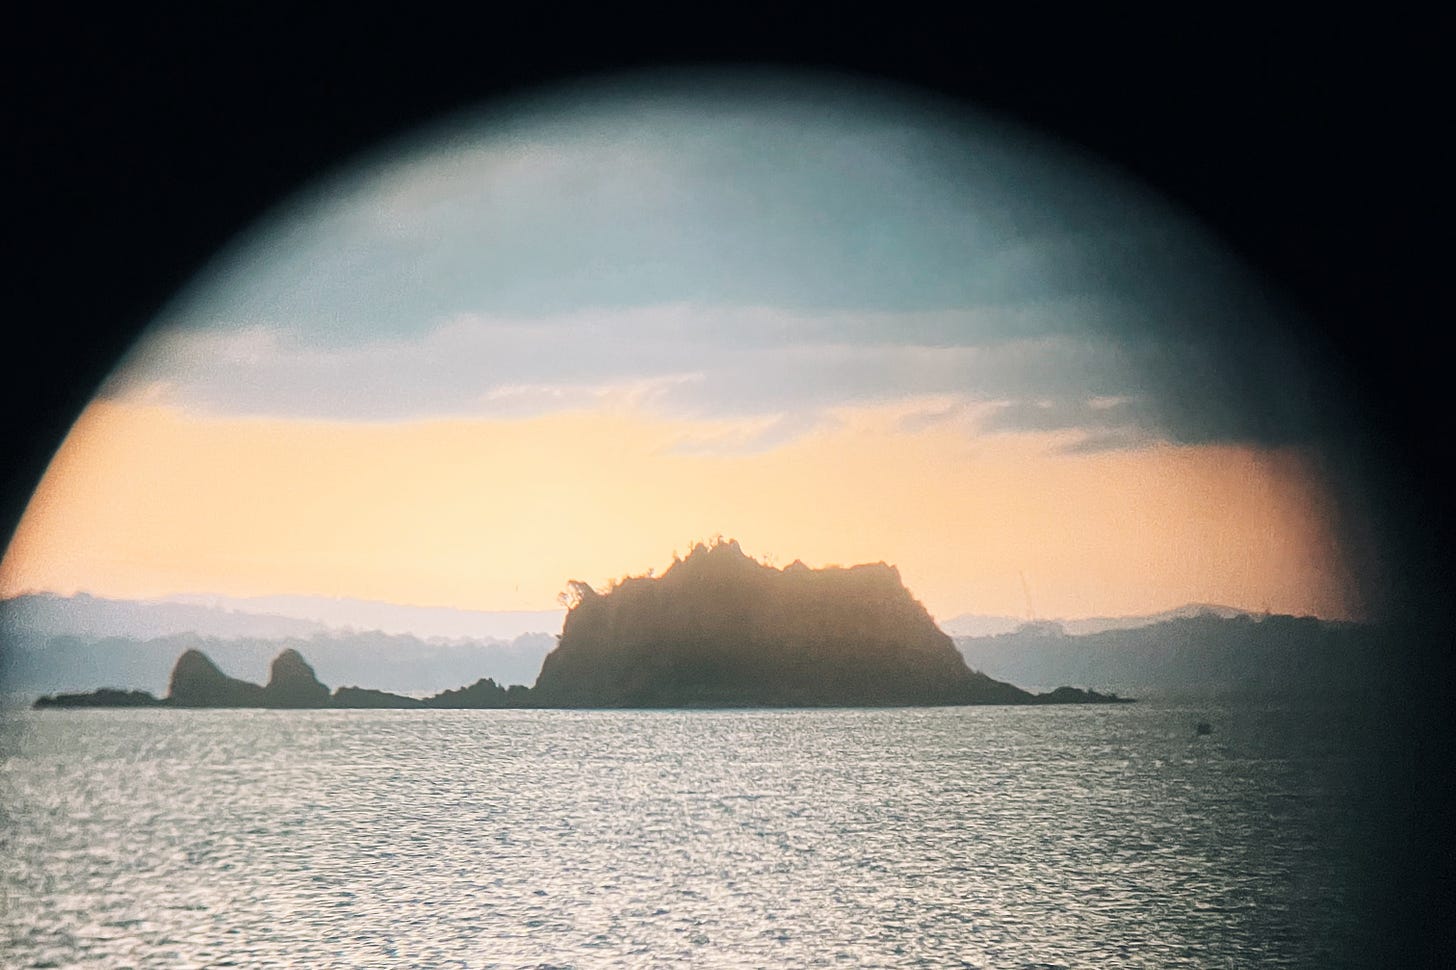 An island appears through the black border of a binoculars lens. The time is sundown and in the background is the sea and a layer of hills on a distant western shore